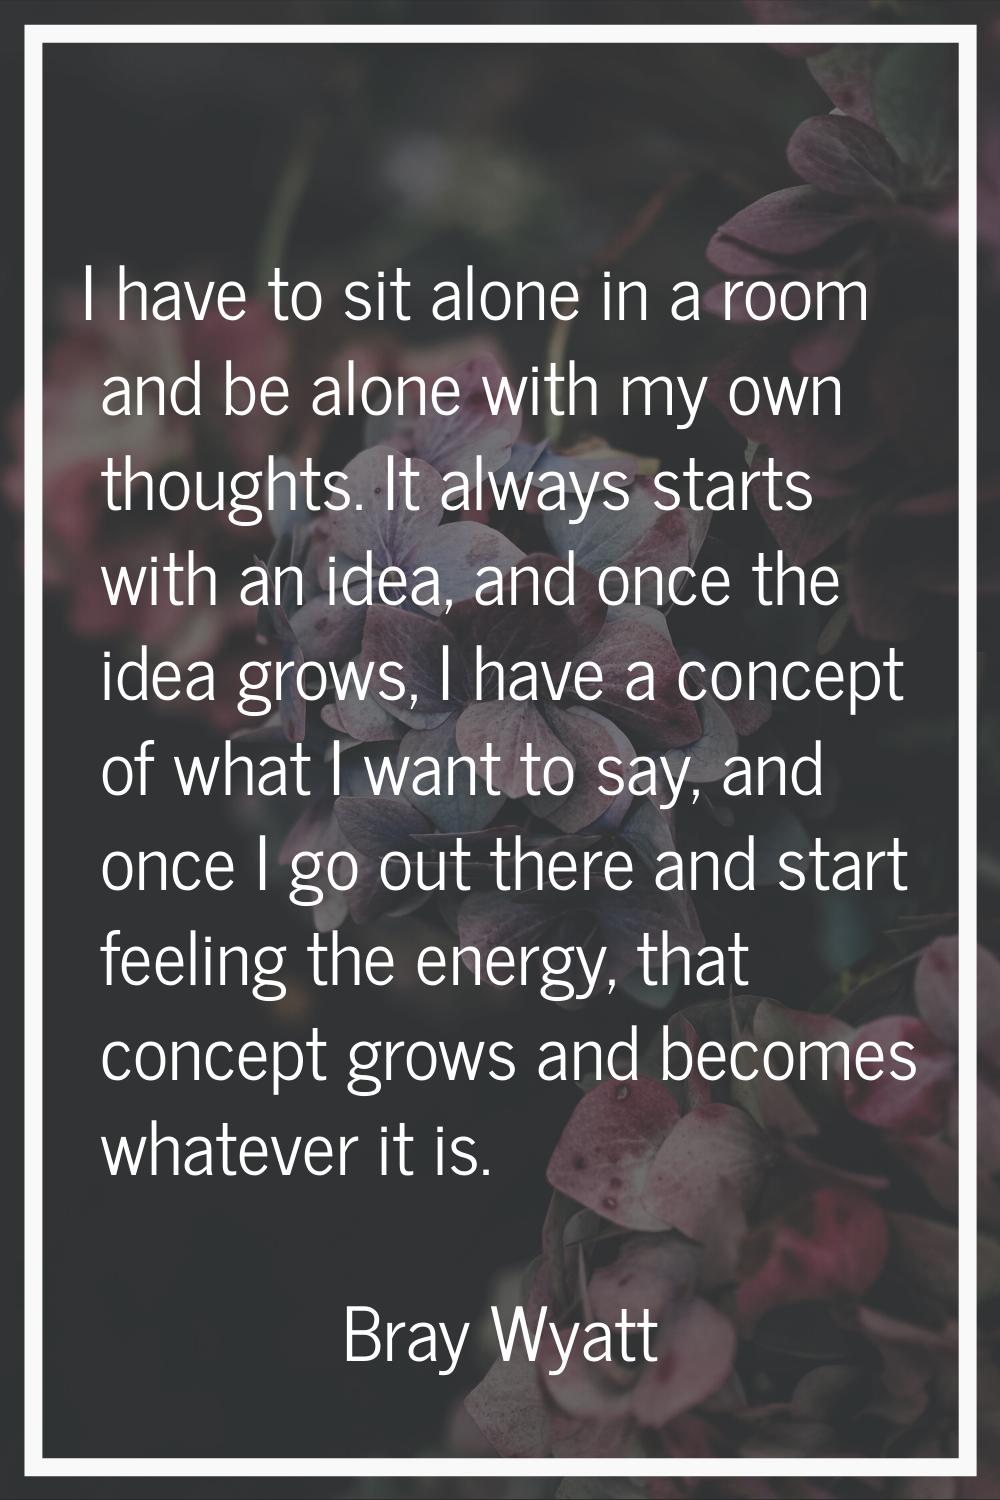 I have to sit alone in a room and be alone with my own thoughts. It always starts with an idea, and